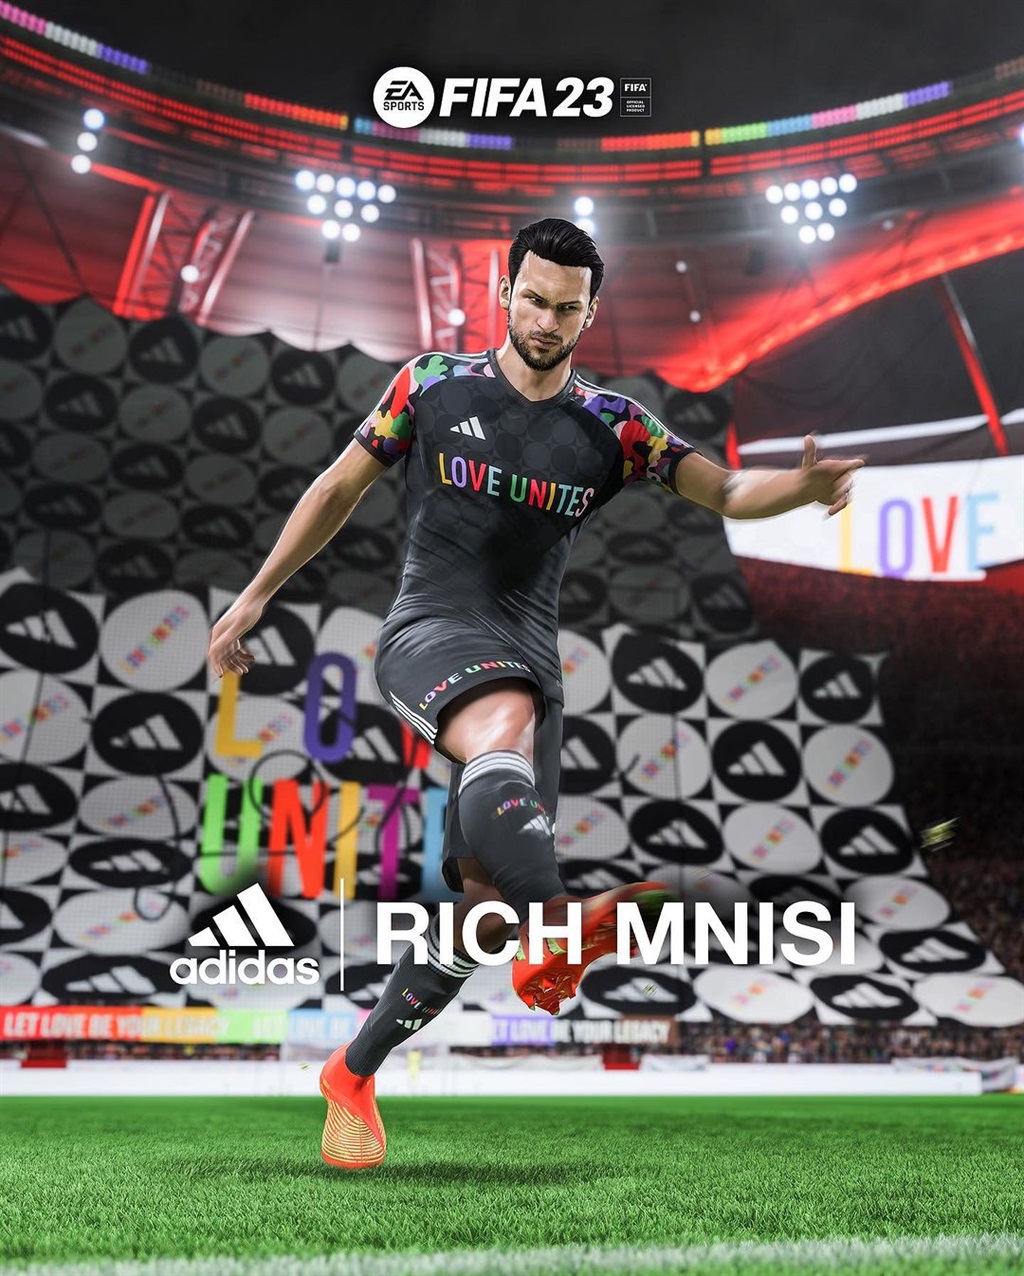 The Rich Mnisi brand recently announced that their 'Let Love Be Your Legacy' collection is now available on FIFA 23.